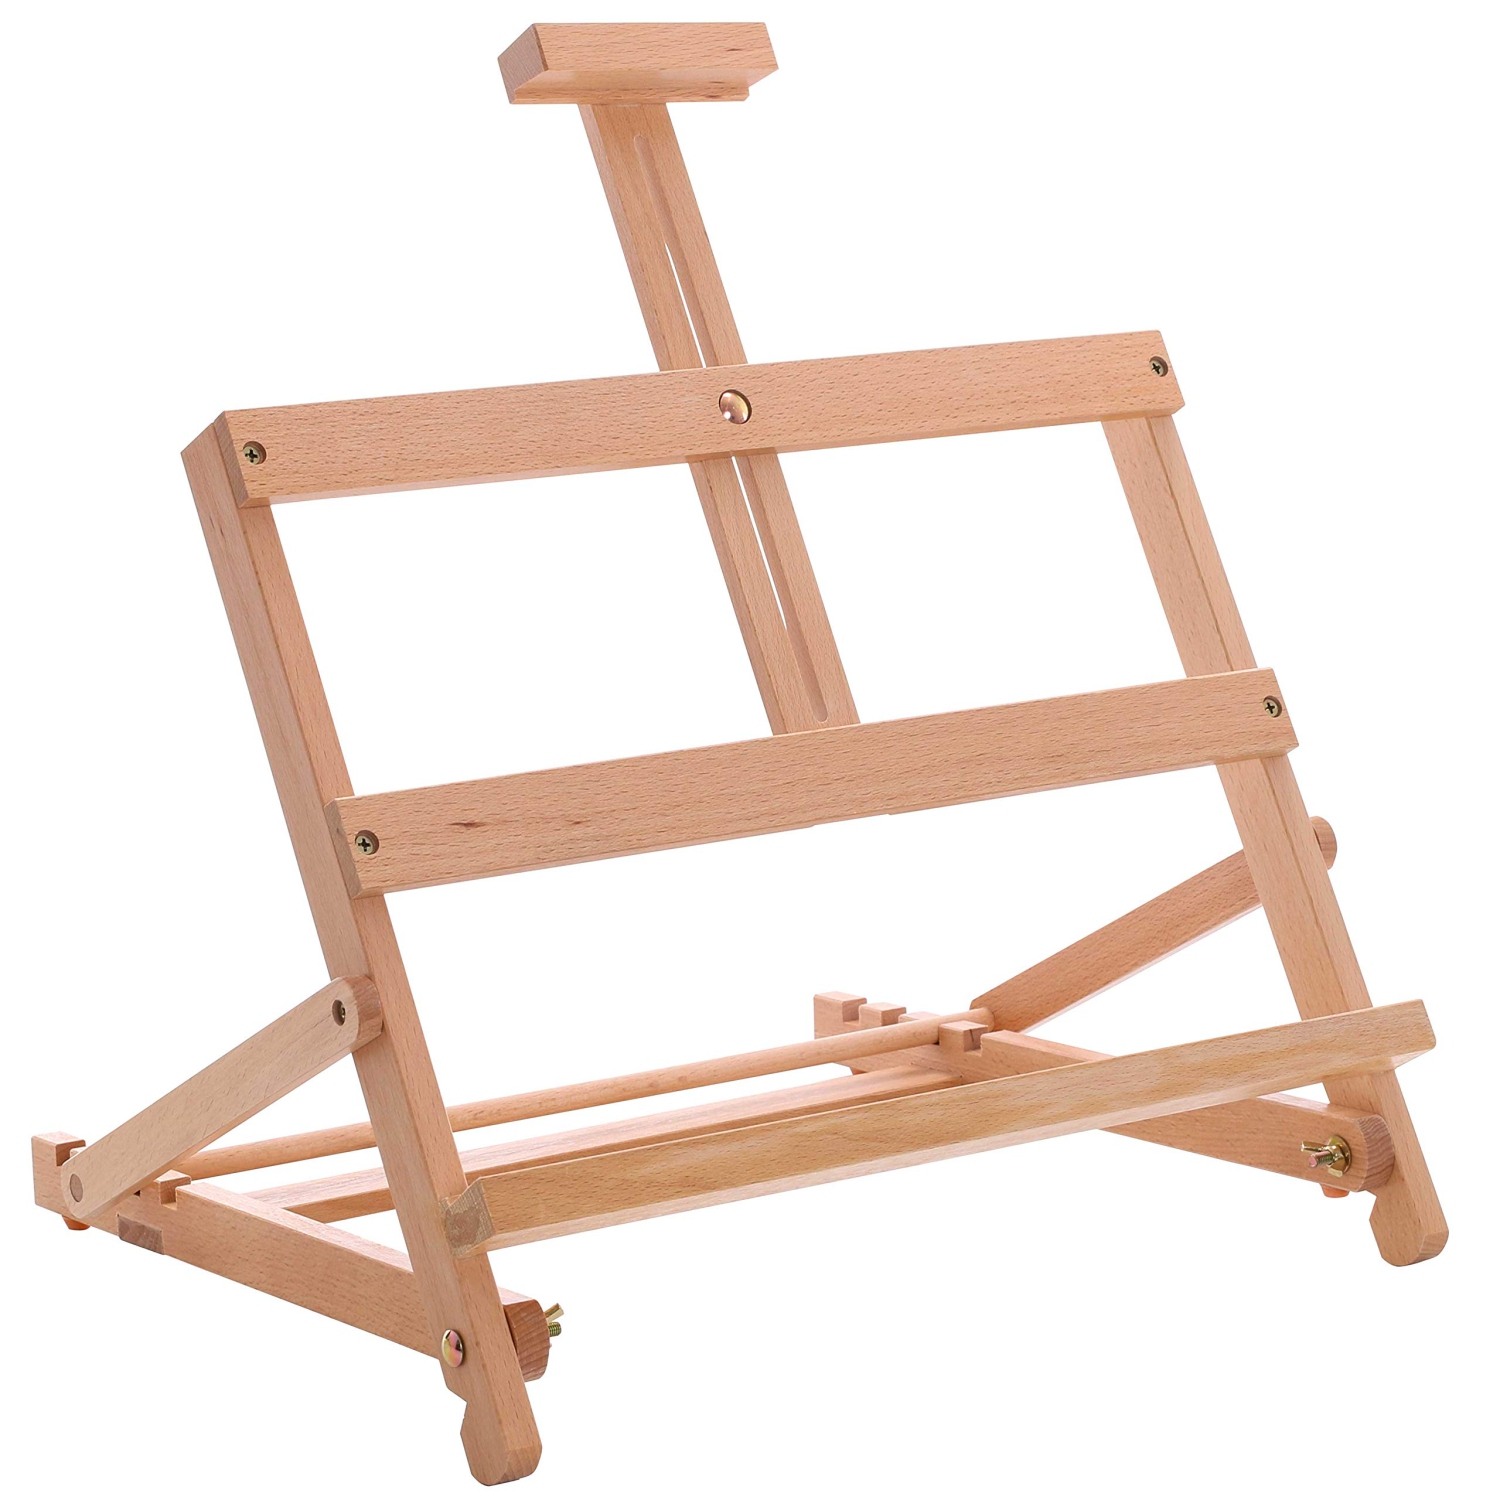 Beechwood Studio Easel - Portable Small Laptop Wooden H-Frame, Adjustable Tabletop Holder Stand for Artists, Ideal for Painting and Display, Holds Up To 19" Canvas, Sturdy Table De